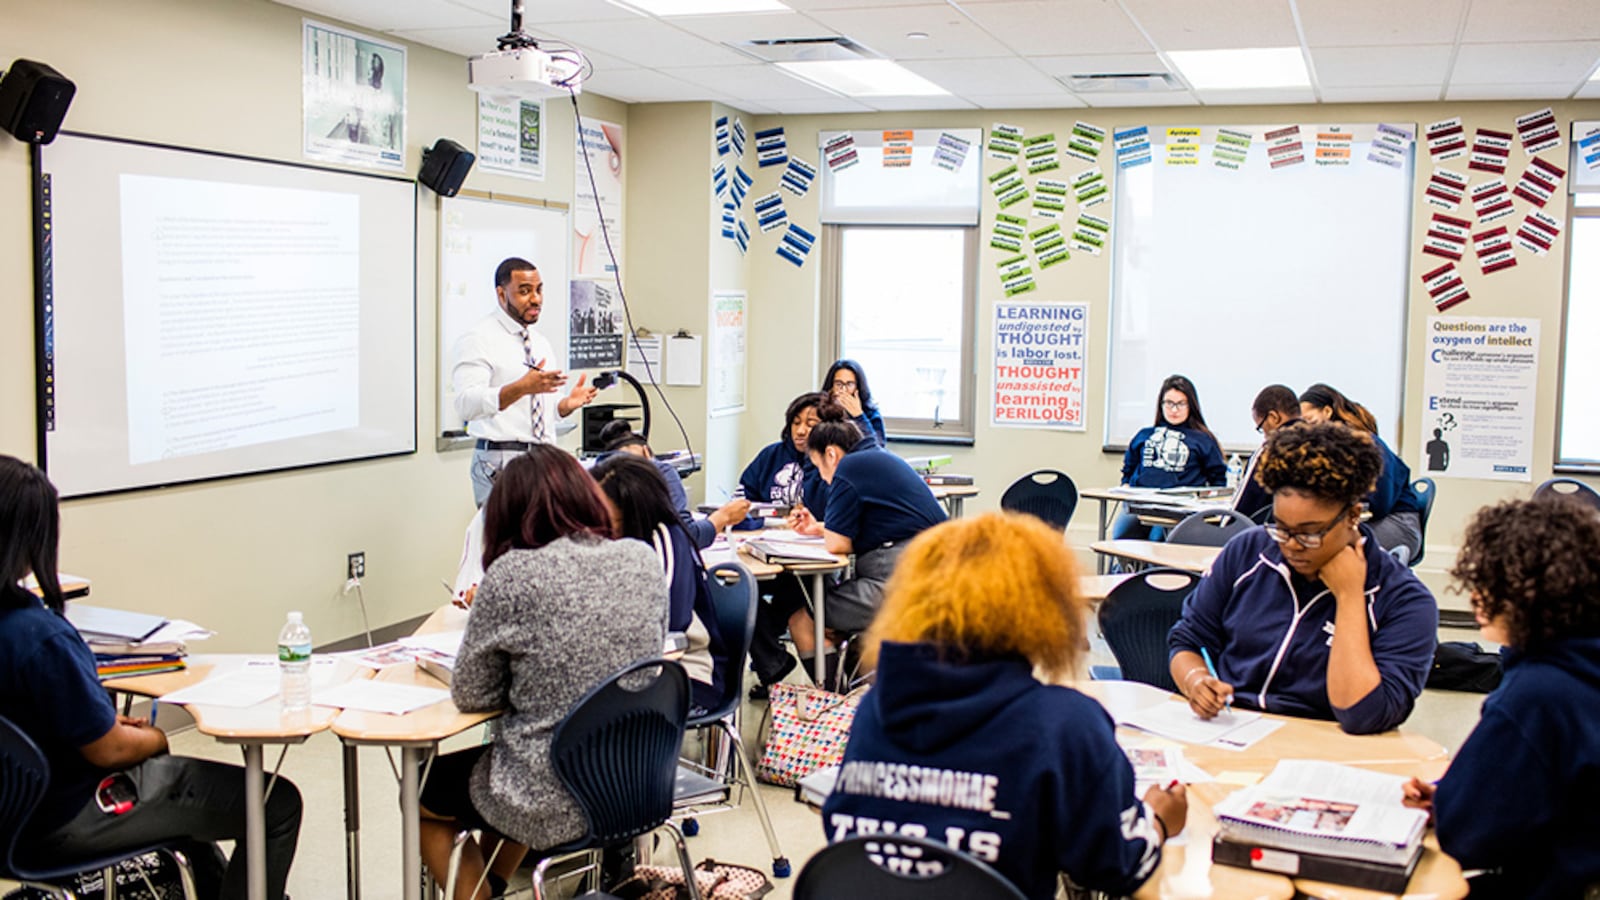 StAn Advanced Placement U.S. History class at North Star College Preparatory High School in Newark is among those recognized by TNTP as offering challenging instruction.